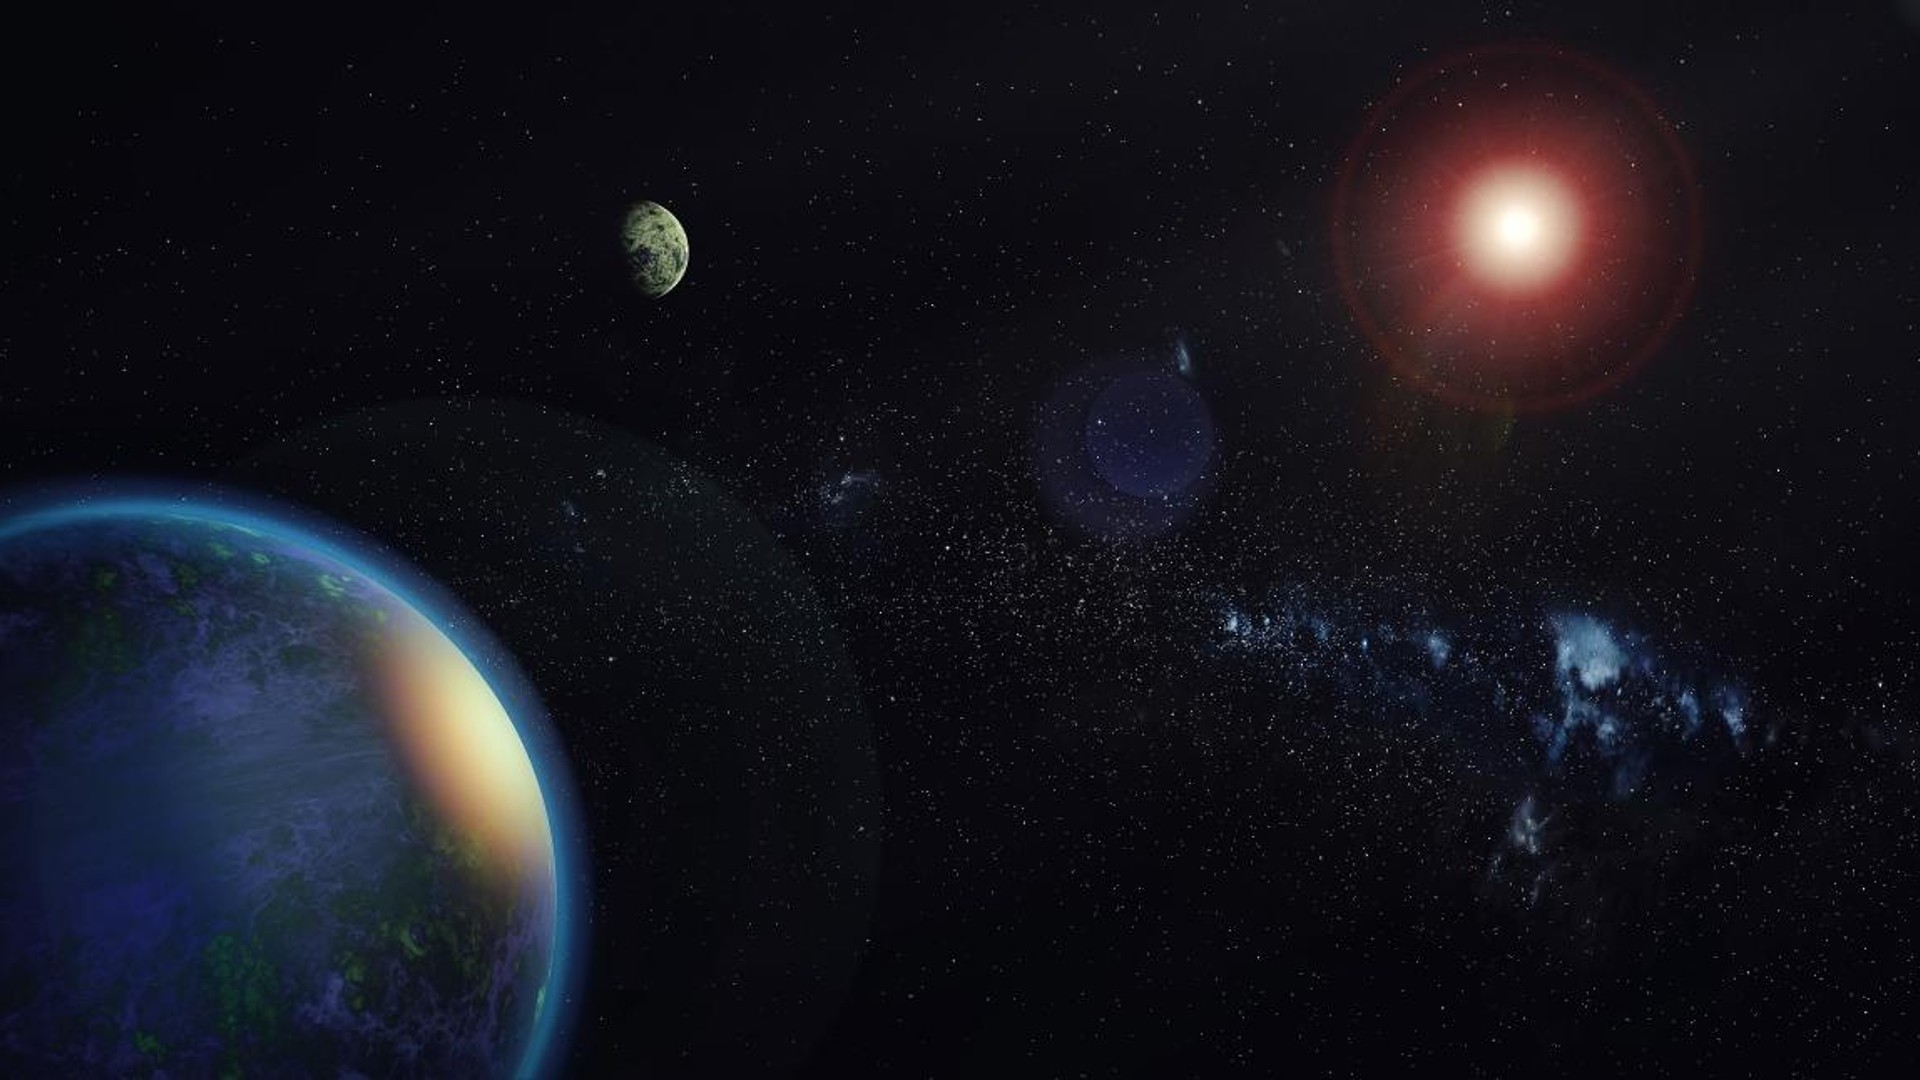 Two potentially habitable Earth-like worlds orbit a star in our cosmic backyard